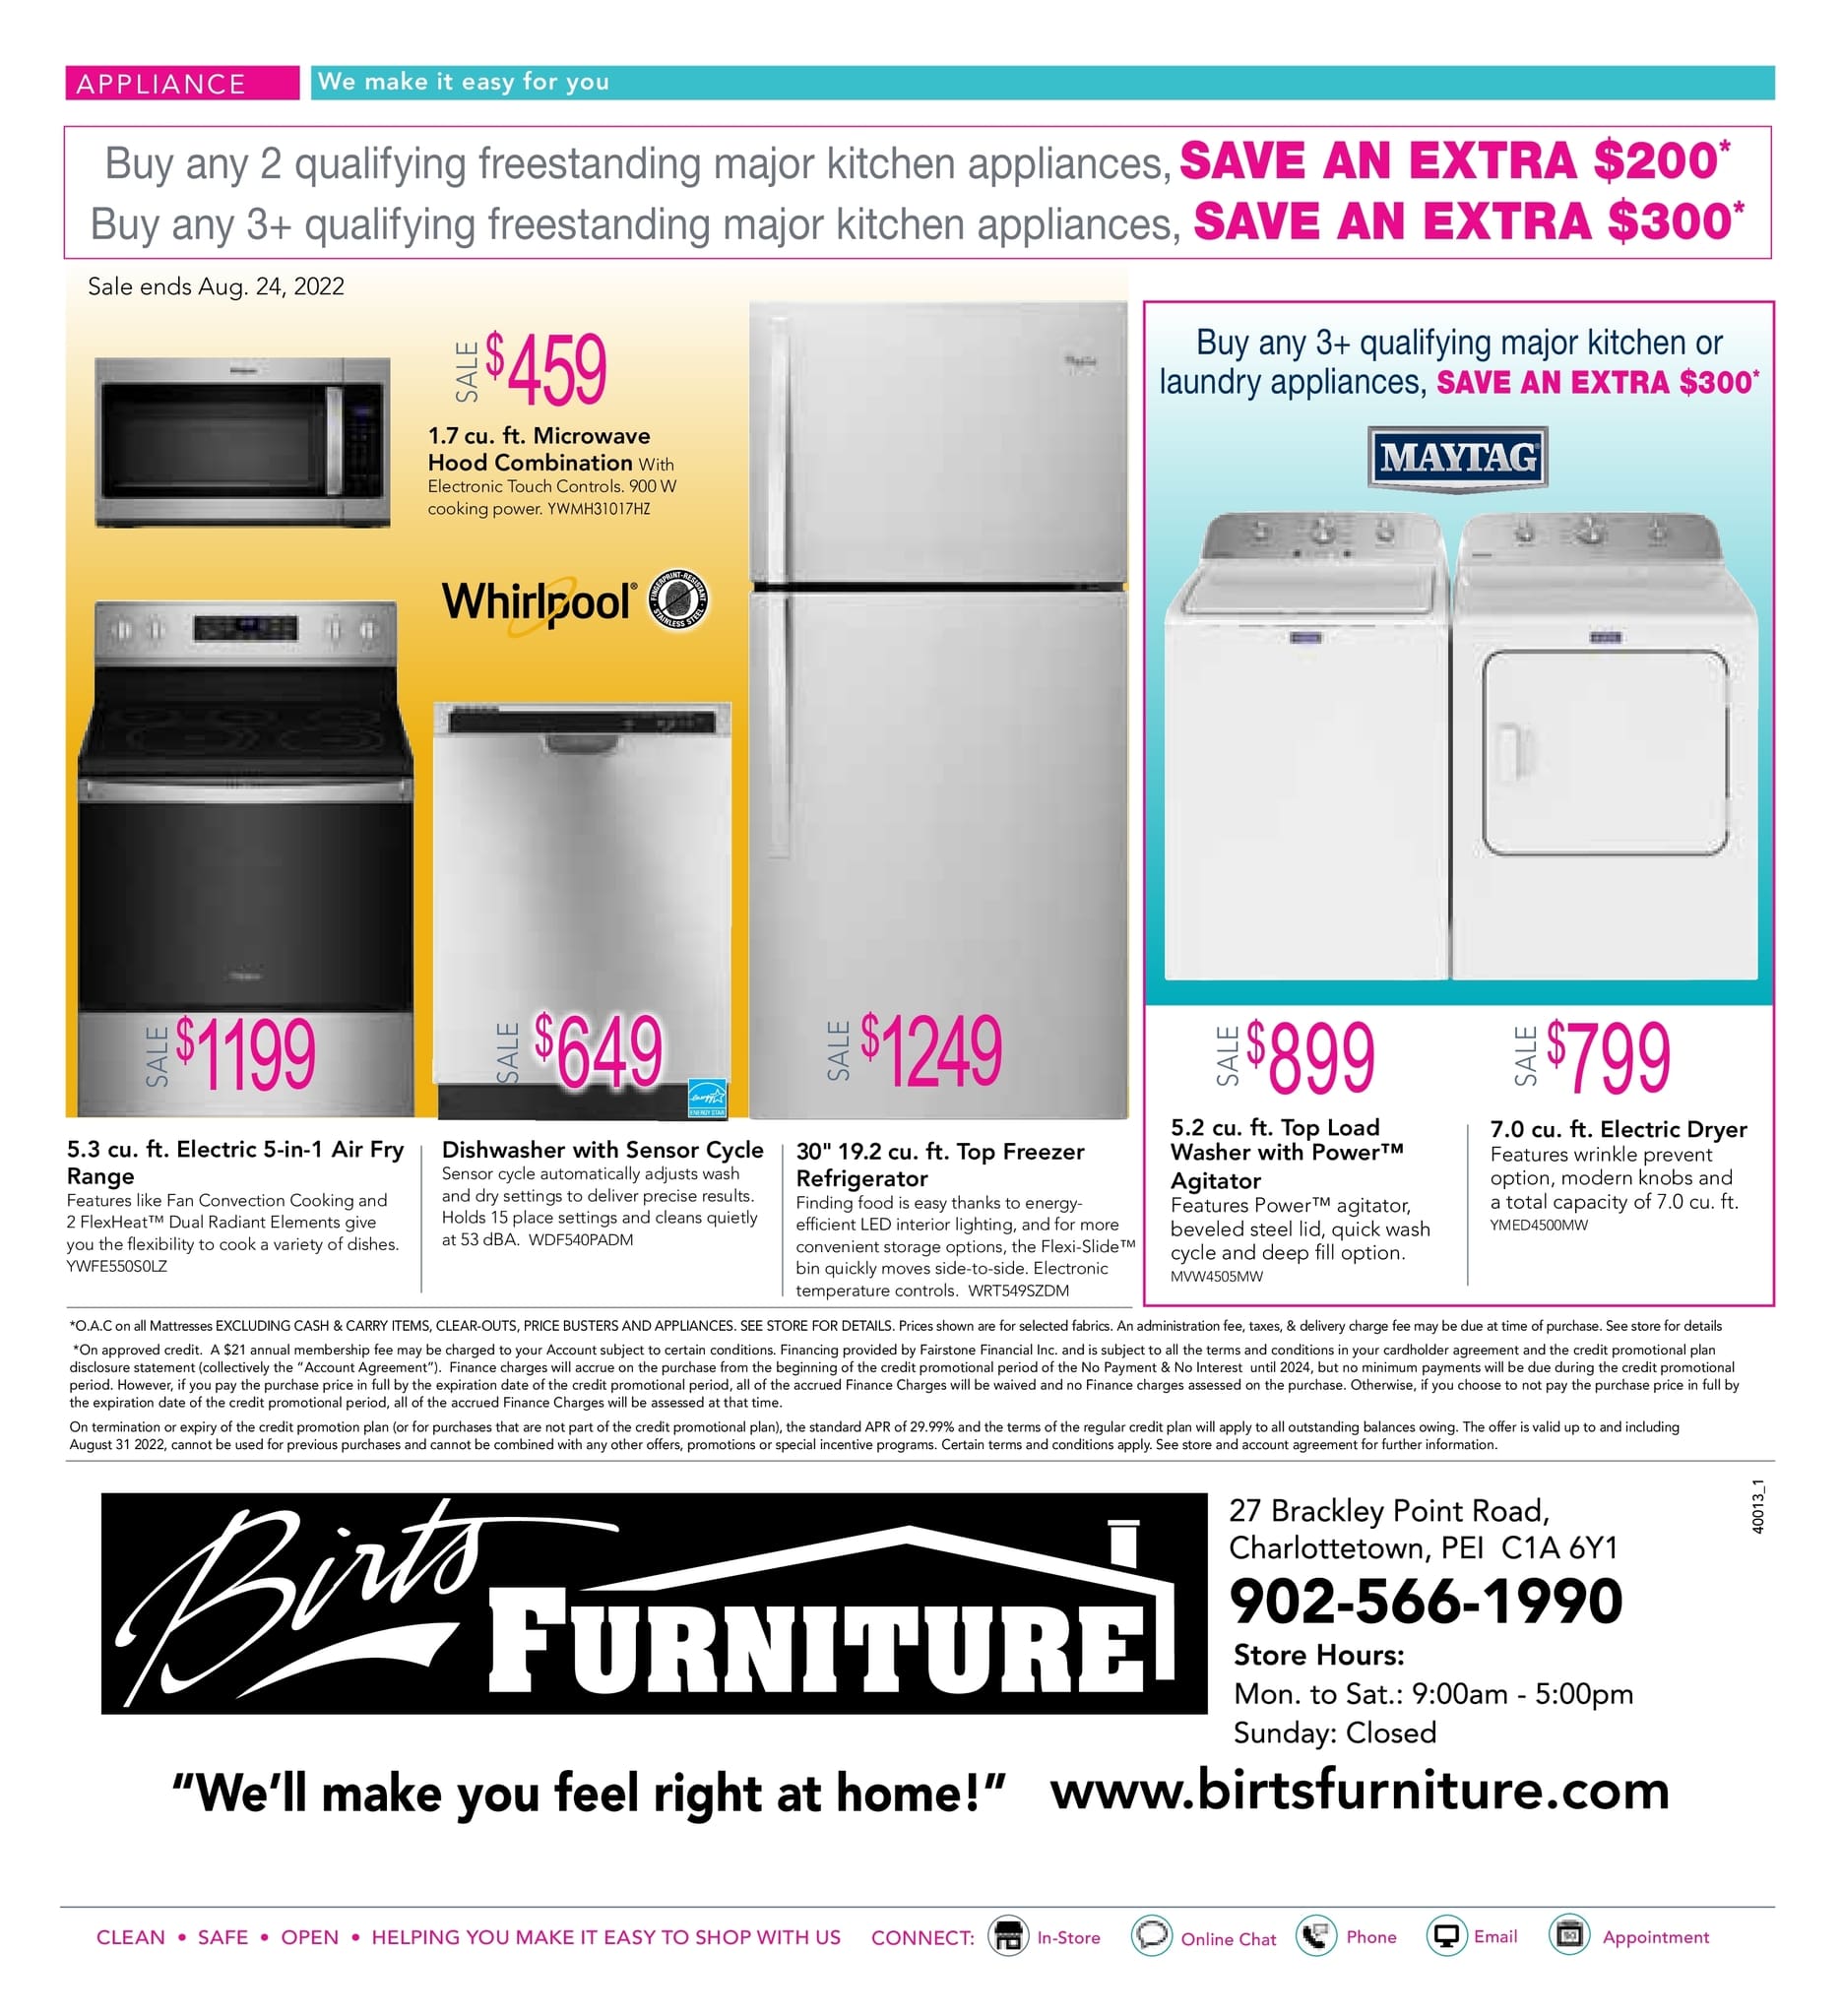 Birts Furniture - Monthly Savings - Page 8